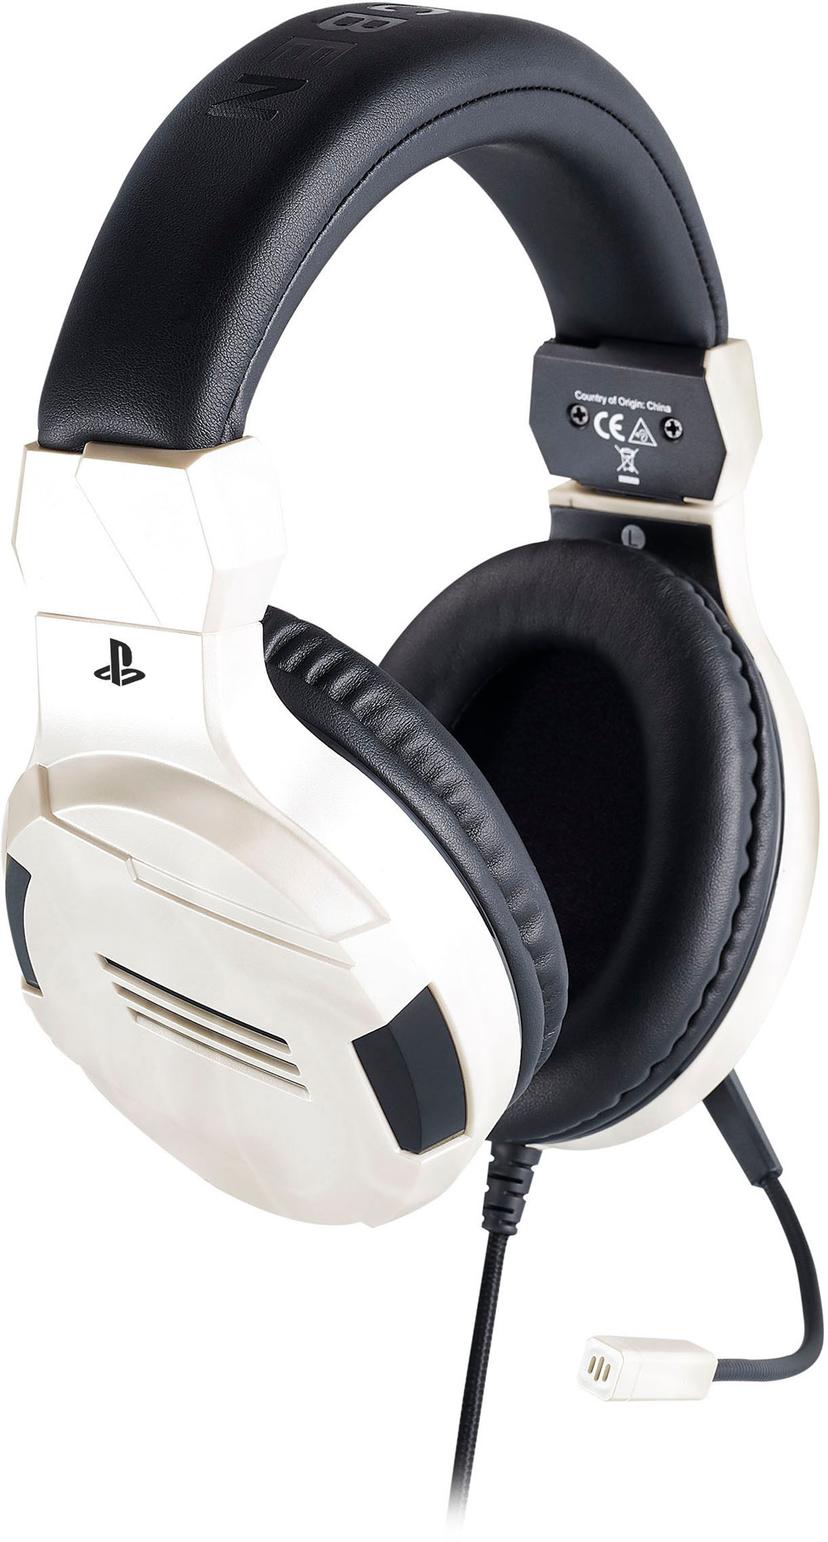 Big Ben Stereo Gaming Headset V3 Ps4/ps5 - White